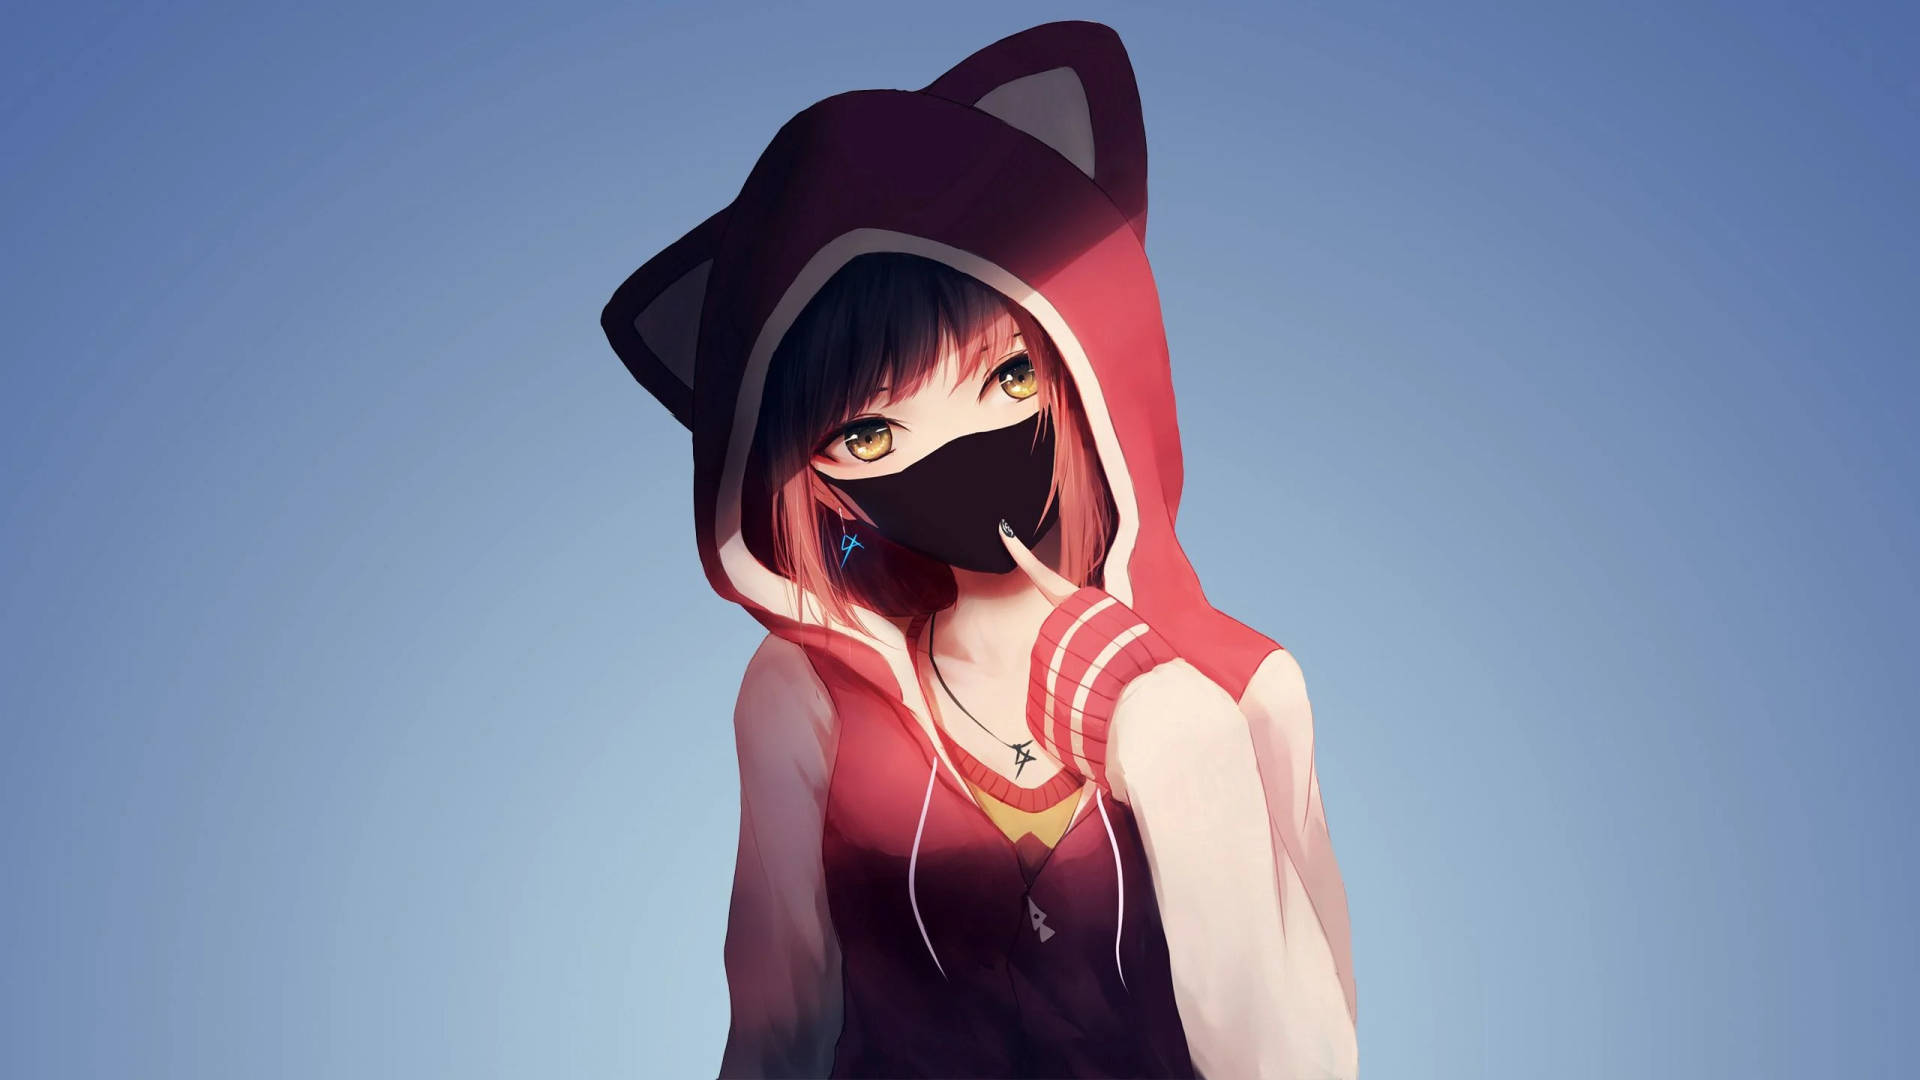 Anime Girl Hoodie With Black Mask Background